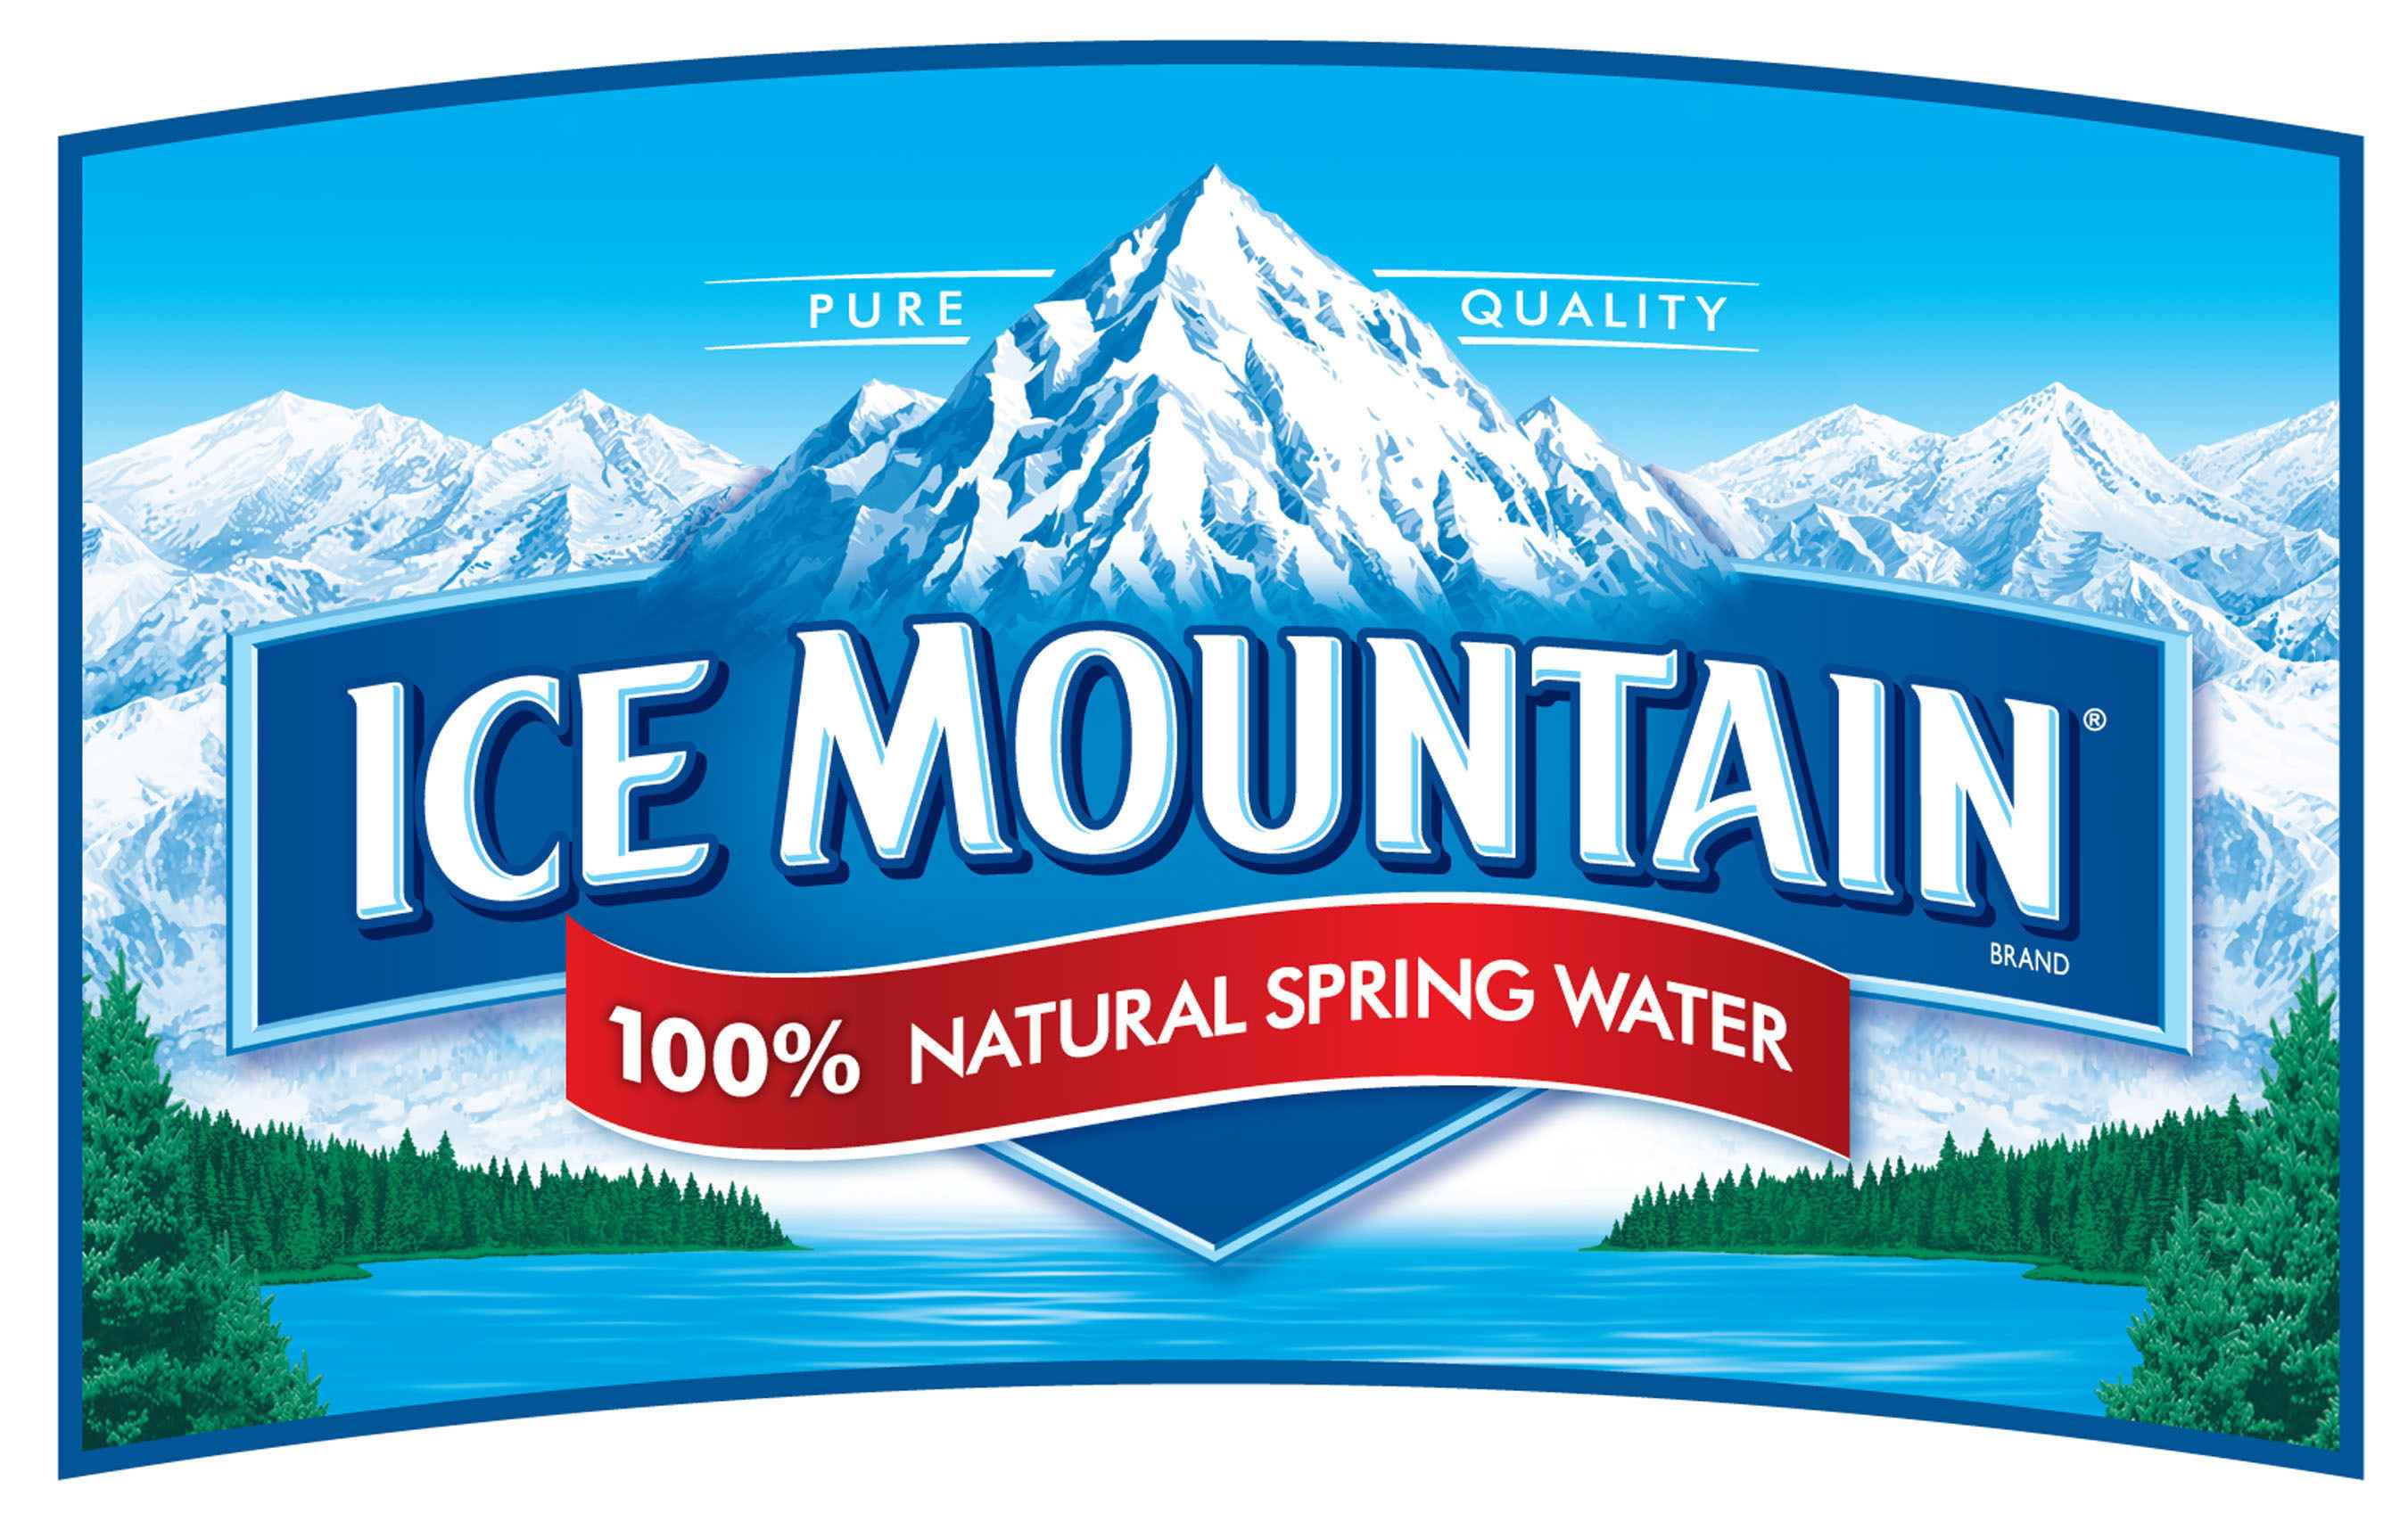 19-facts-about-ice-mountain